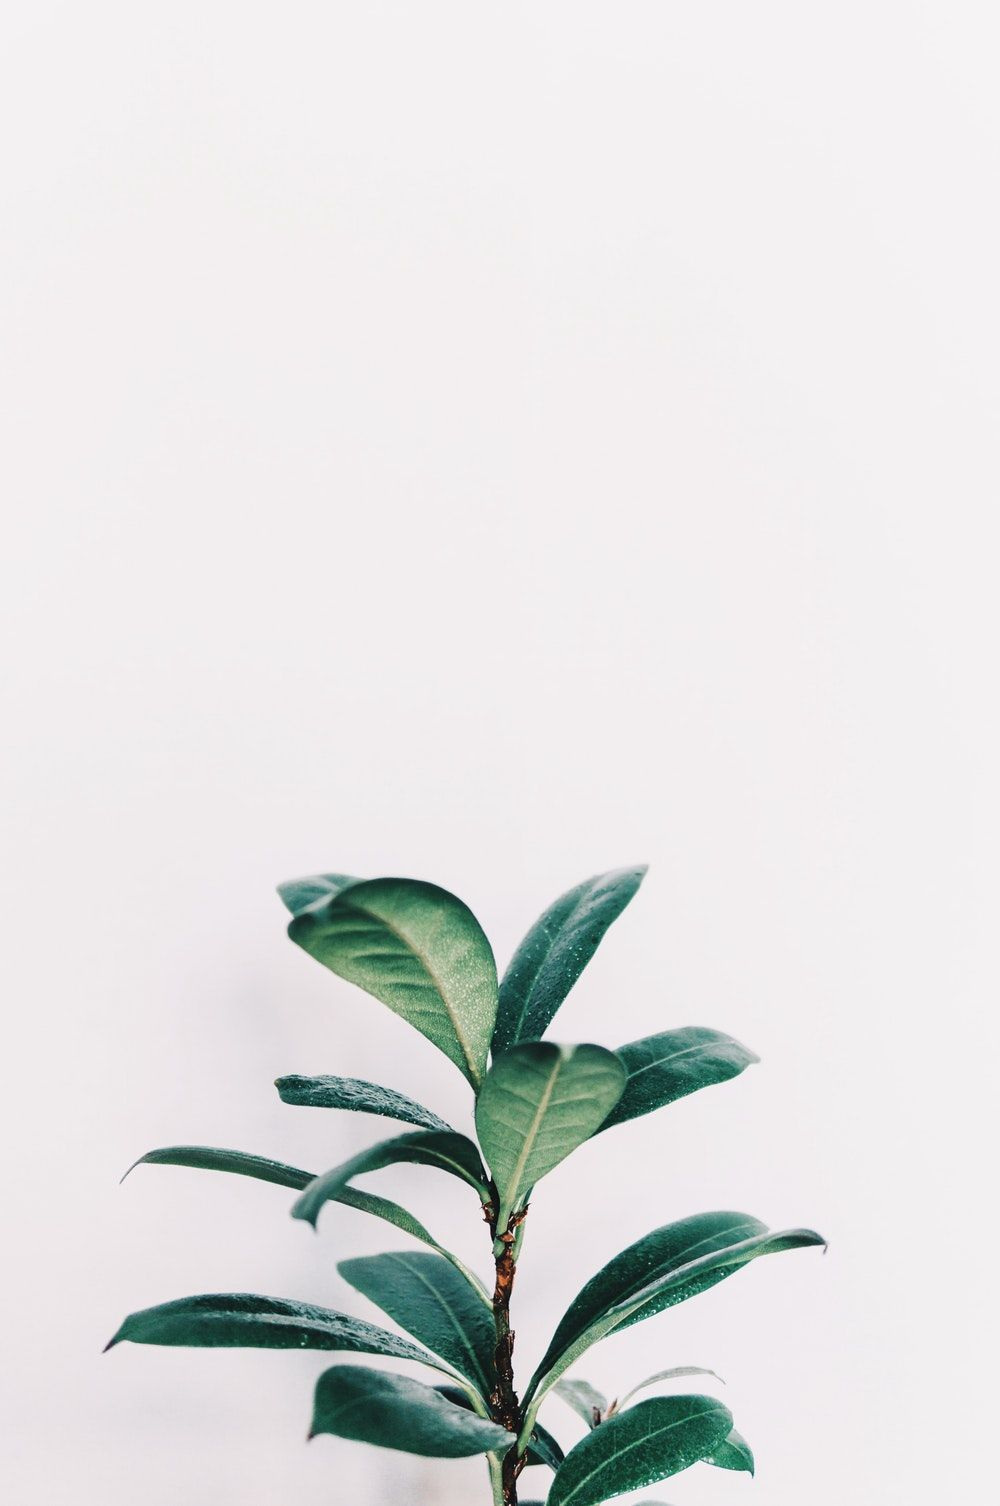 Green and White Aesthetic iPhone wallpaper Free Green and White Aesthetic iPhone wallpaper background